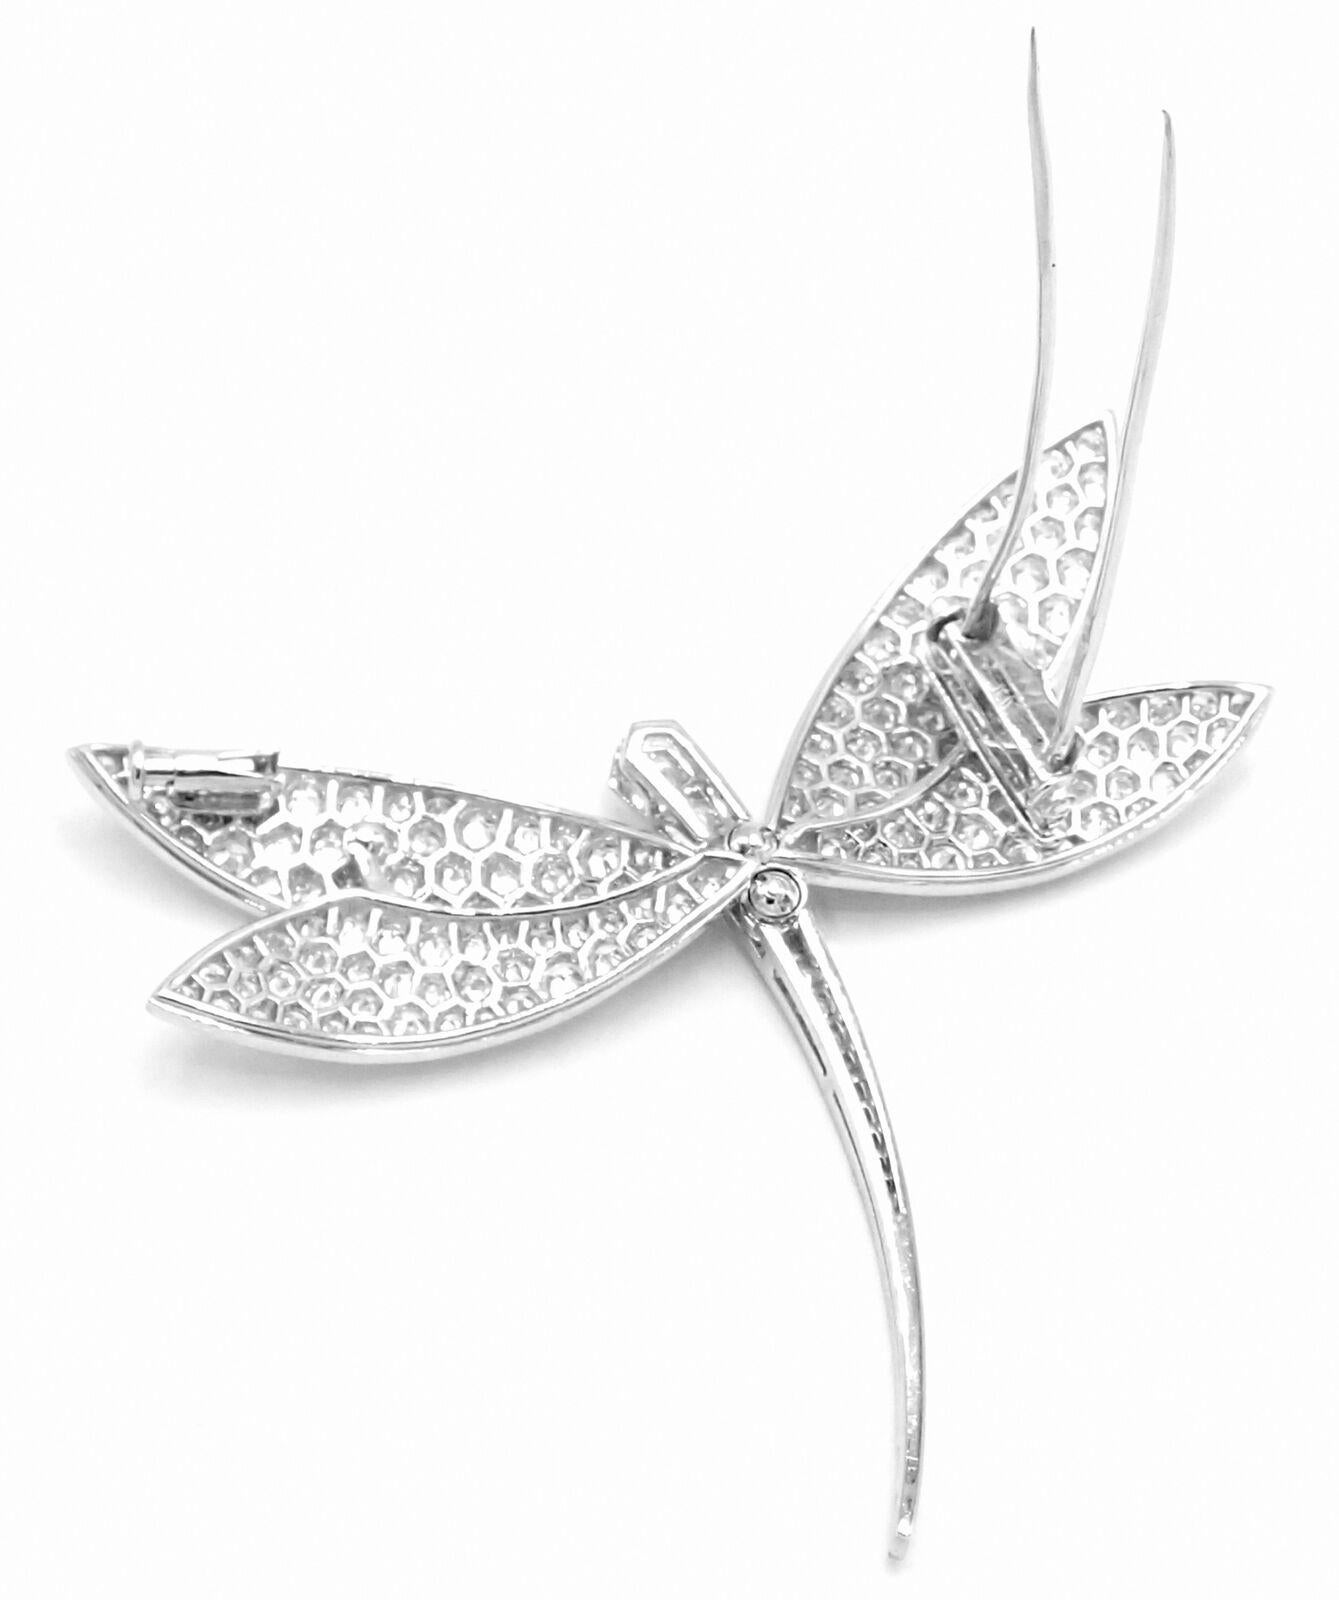 Women's or Men's Van Cleef & Arpels Dragonfly Diamond Large White Gold Pin Brooch